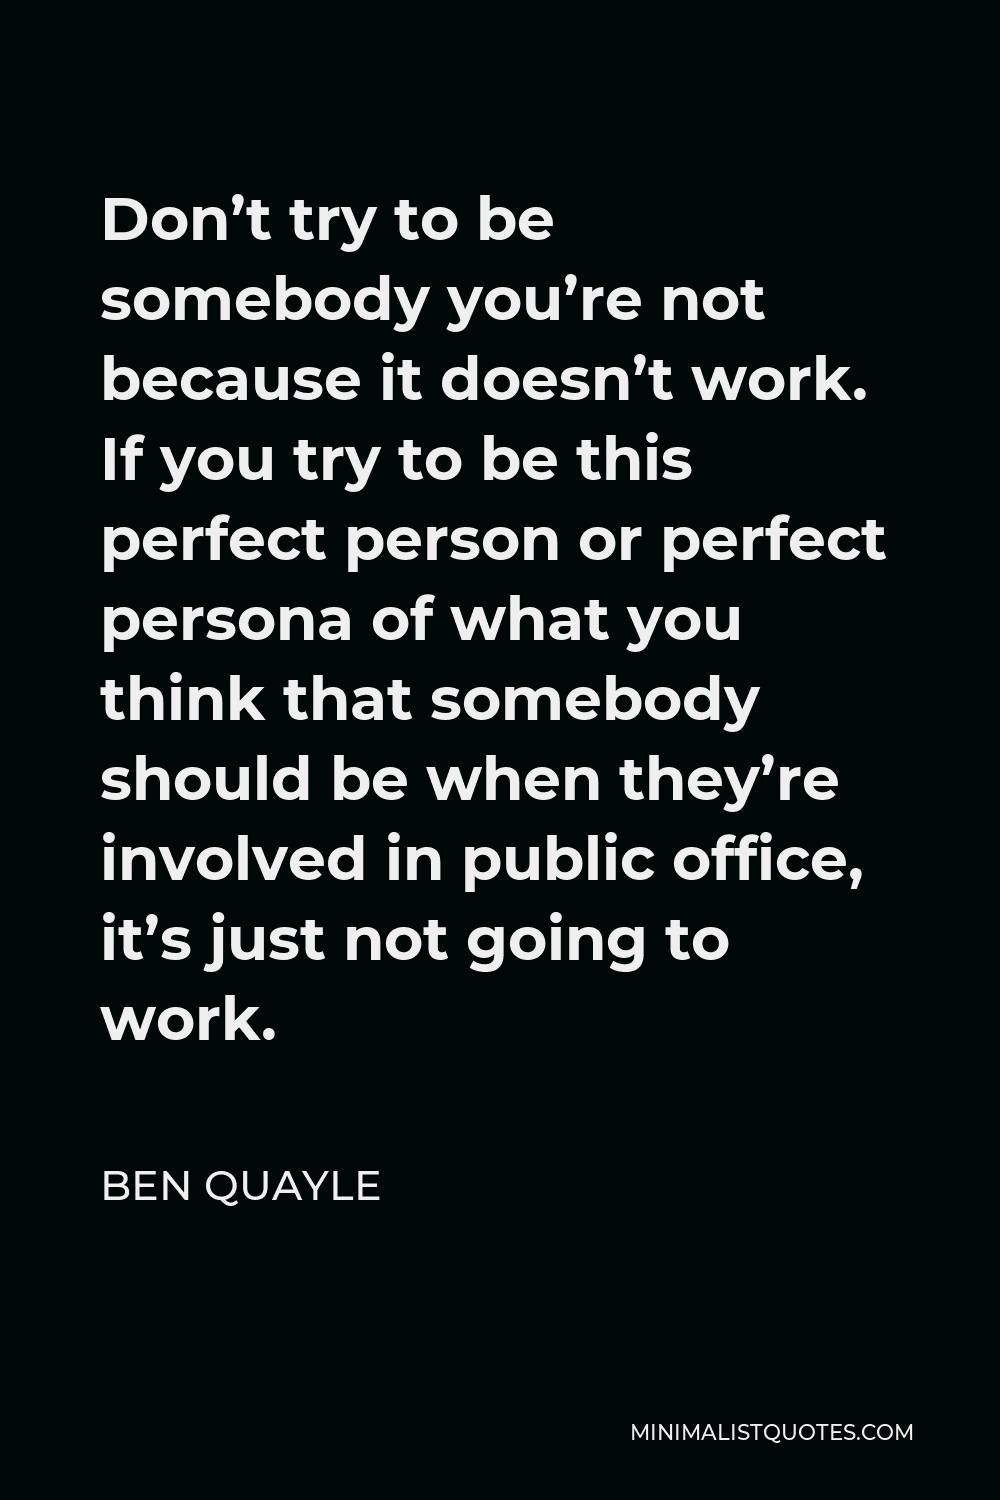 Ben Quayle Quote - Don’t try to be somebody you’re not because it doesn’t work. If you try to be this perfect person or perfect persona of what you think that somebody should be when they’re involved in public office, it’s just not going to work.